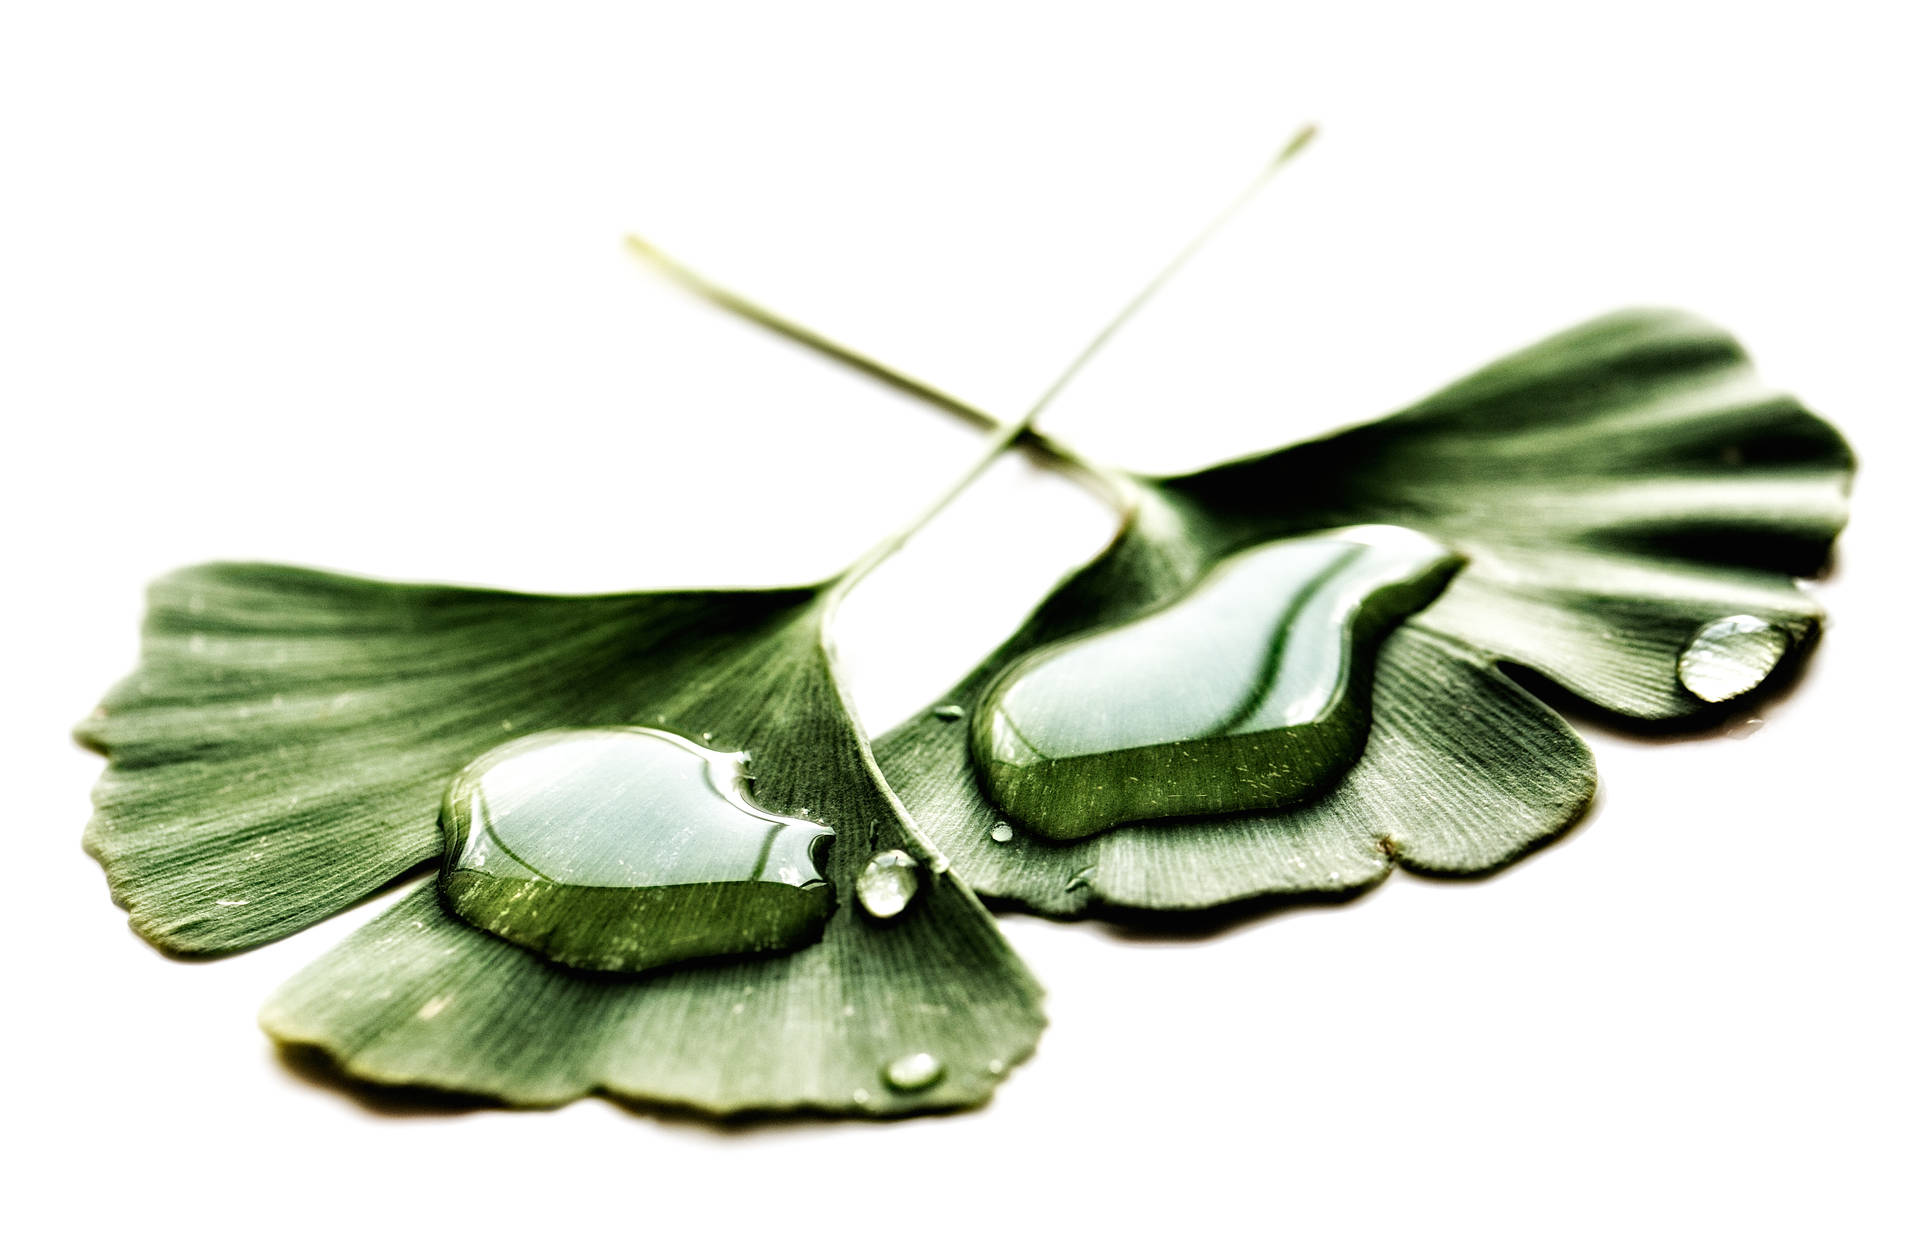 Water Droplets On Leaves